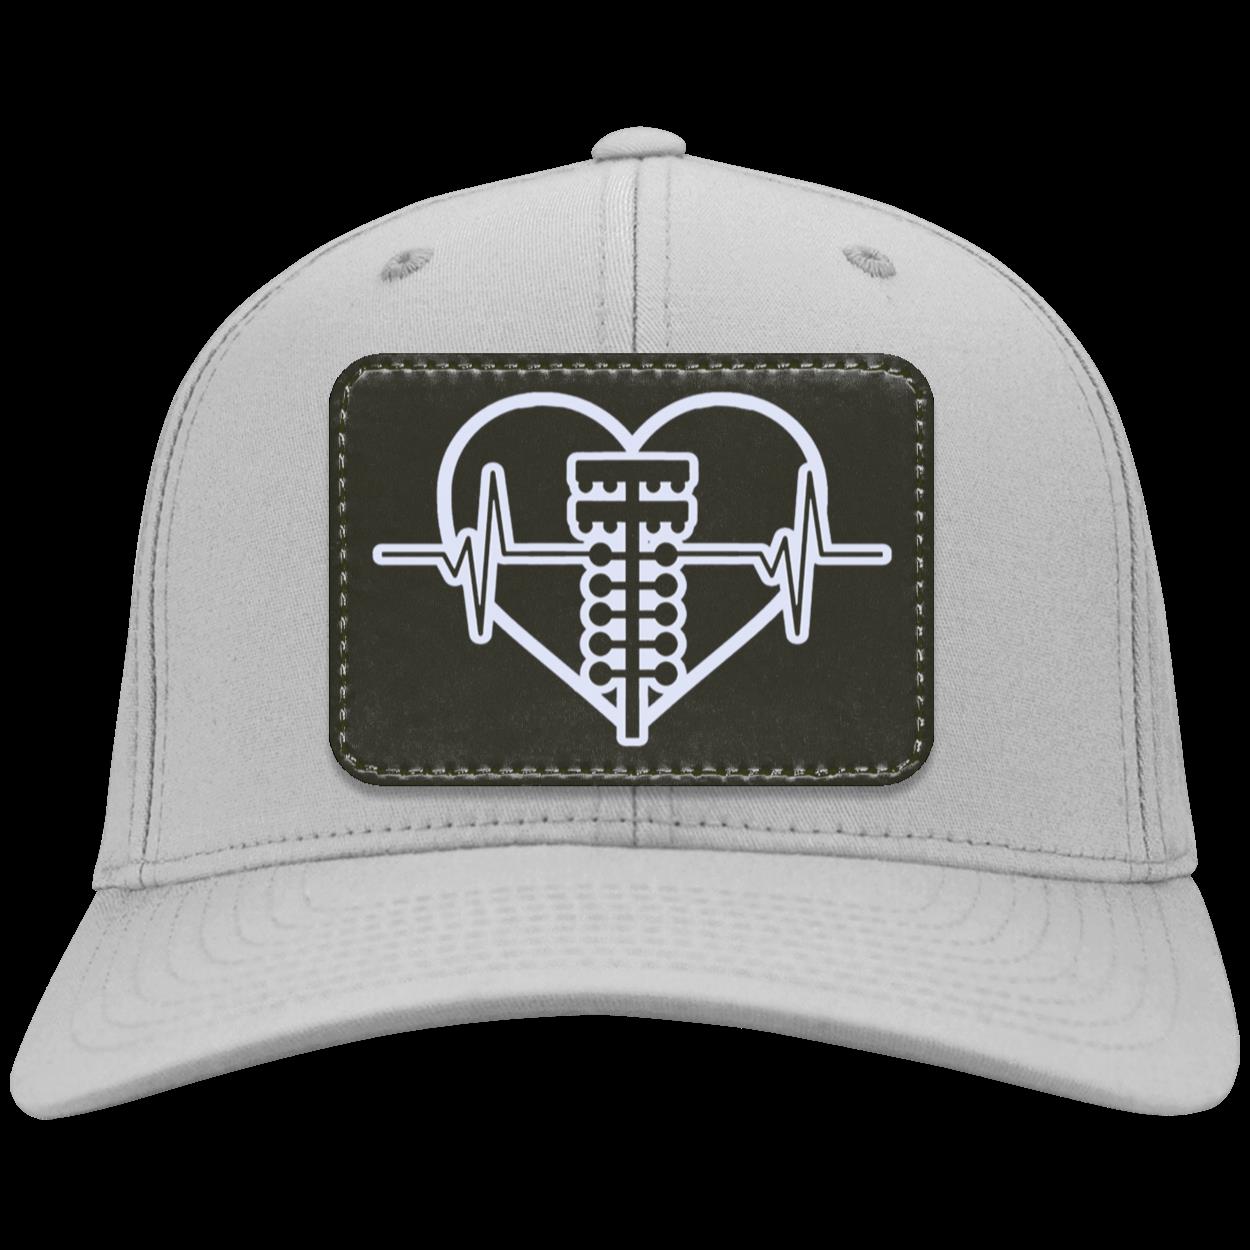 Drag Racing Heartbeat Patched Twill Cap V1